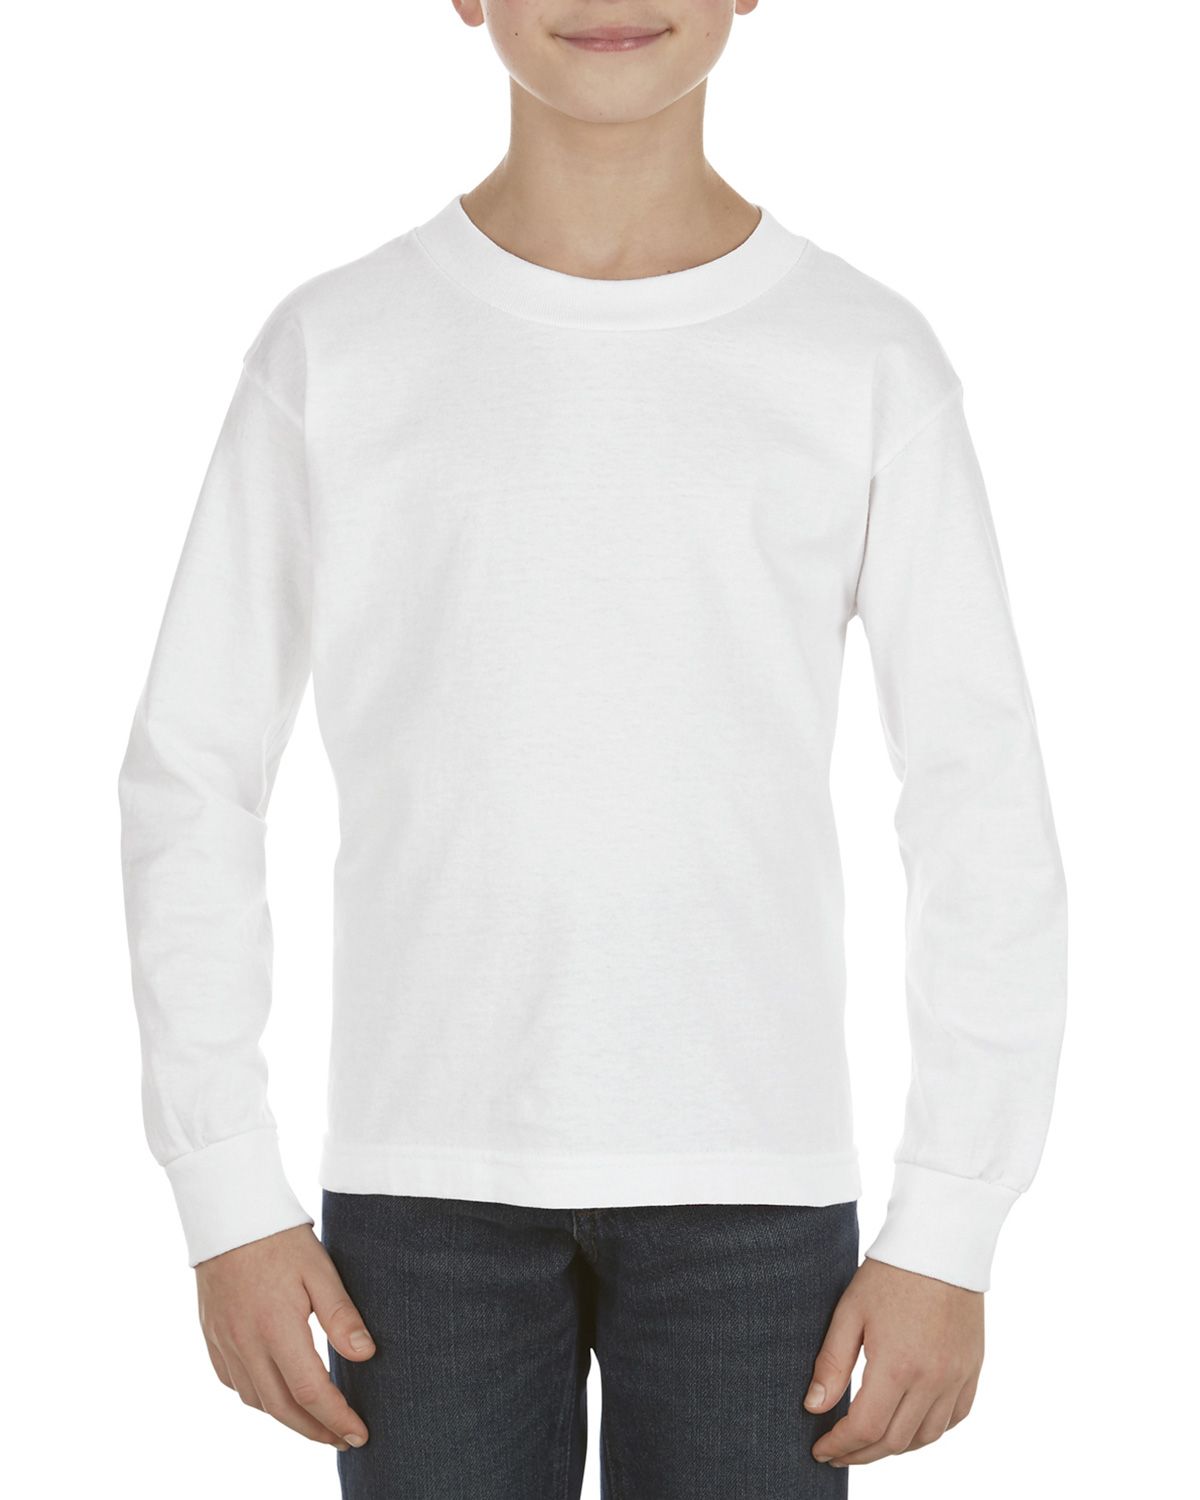 Alstyle AL3384 Youth 6.0 oz. 100% Cotton Long-Sleeve T-Shirt